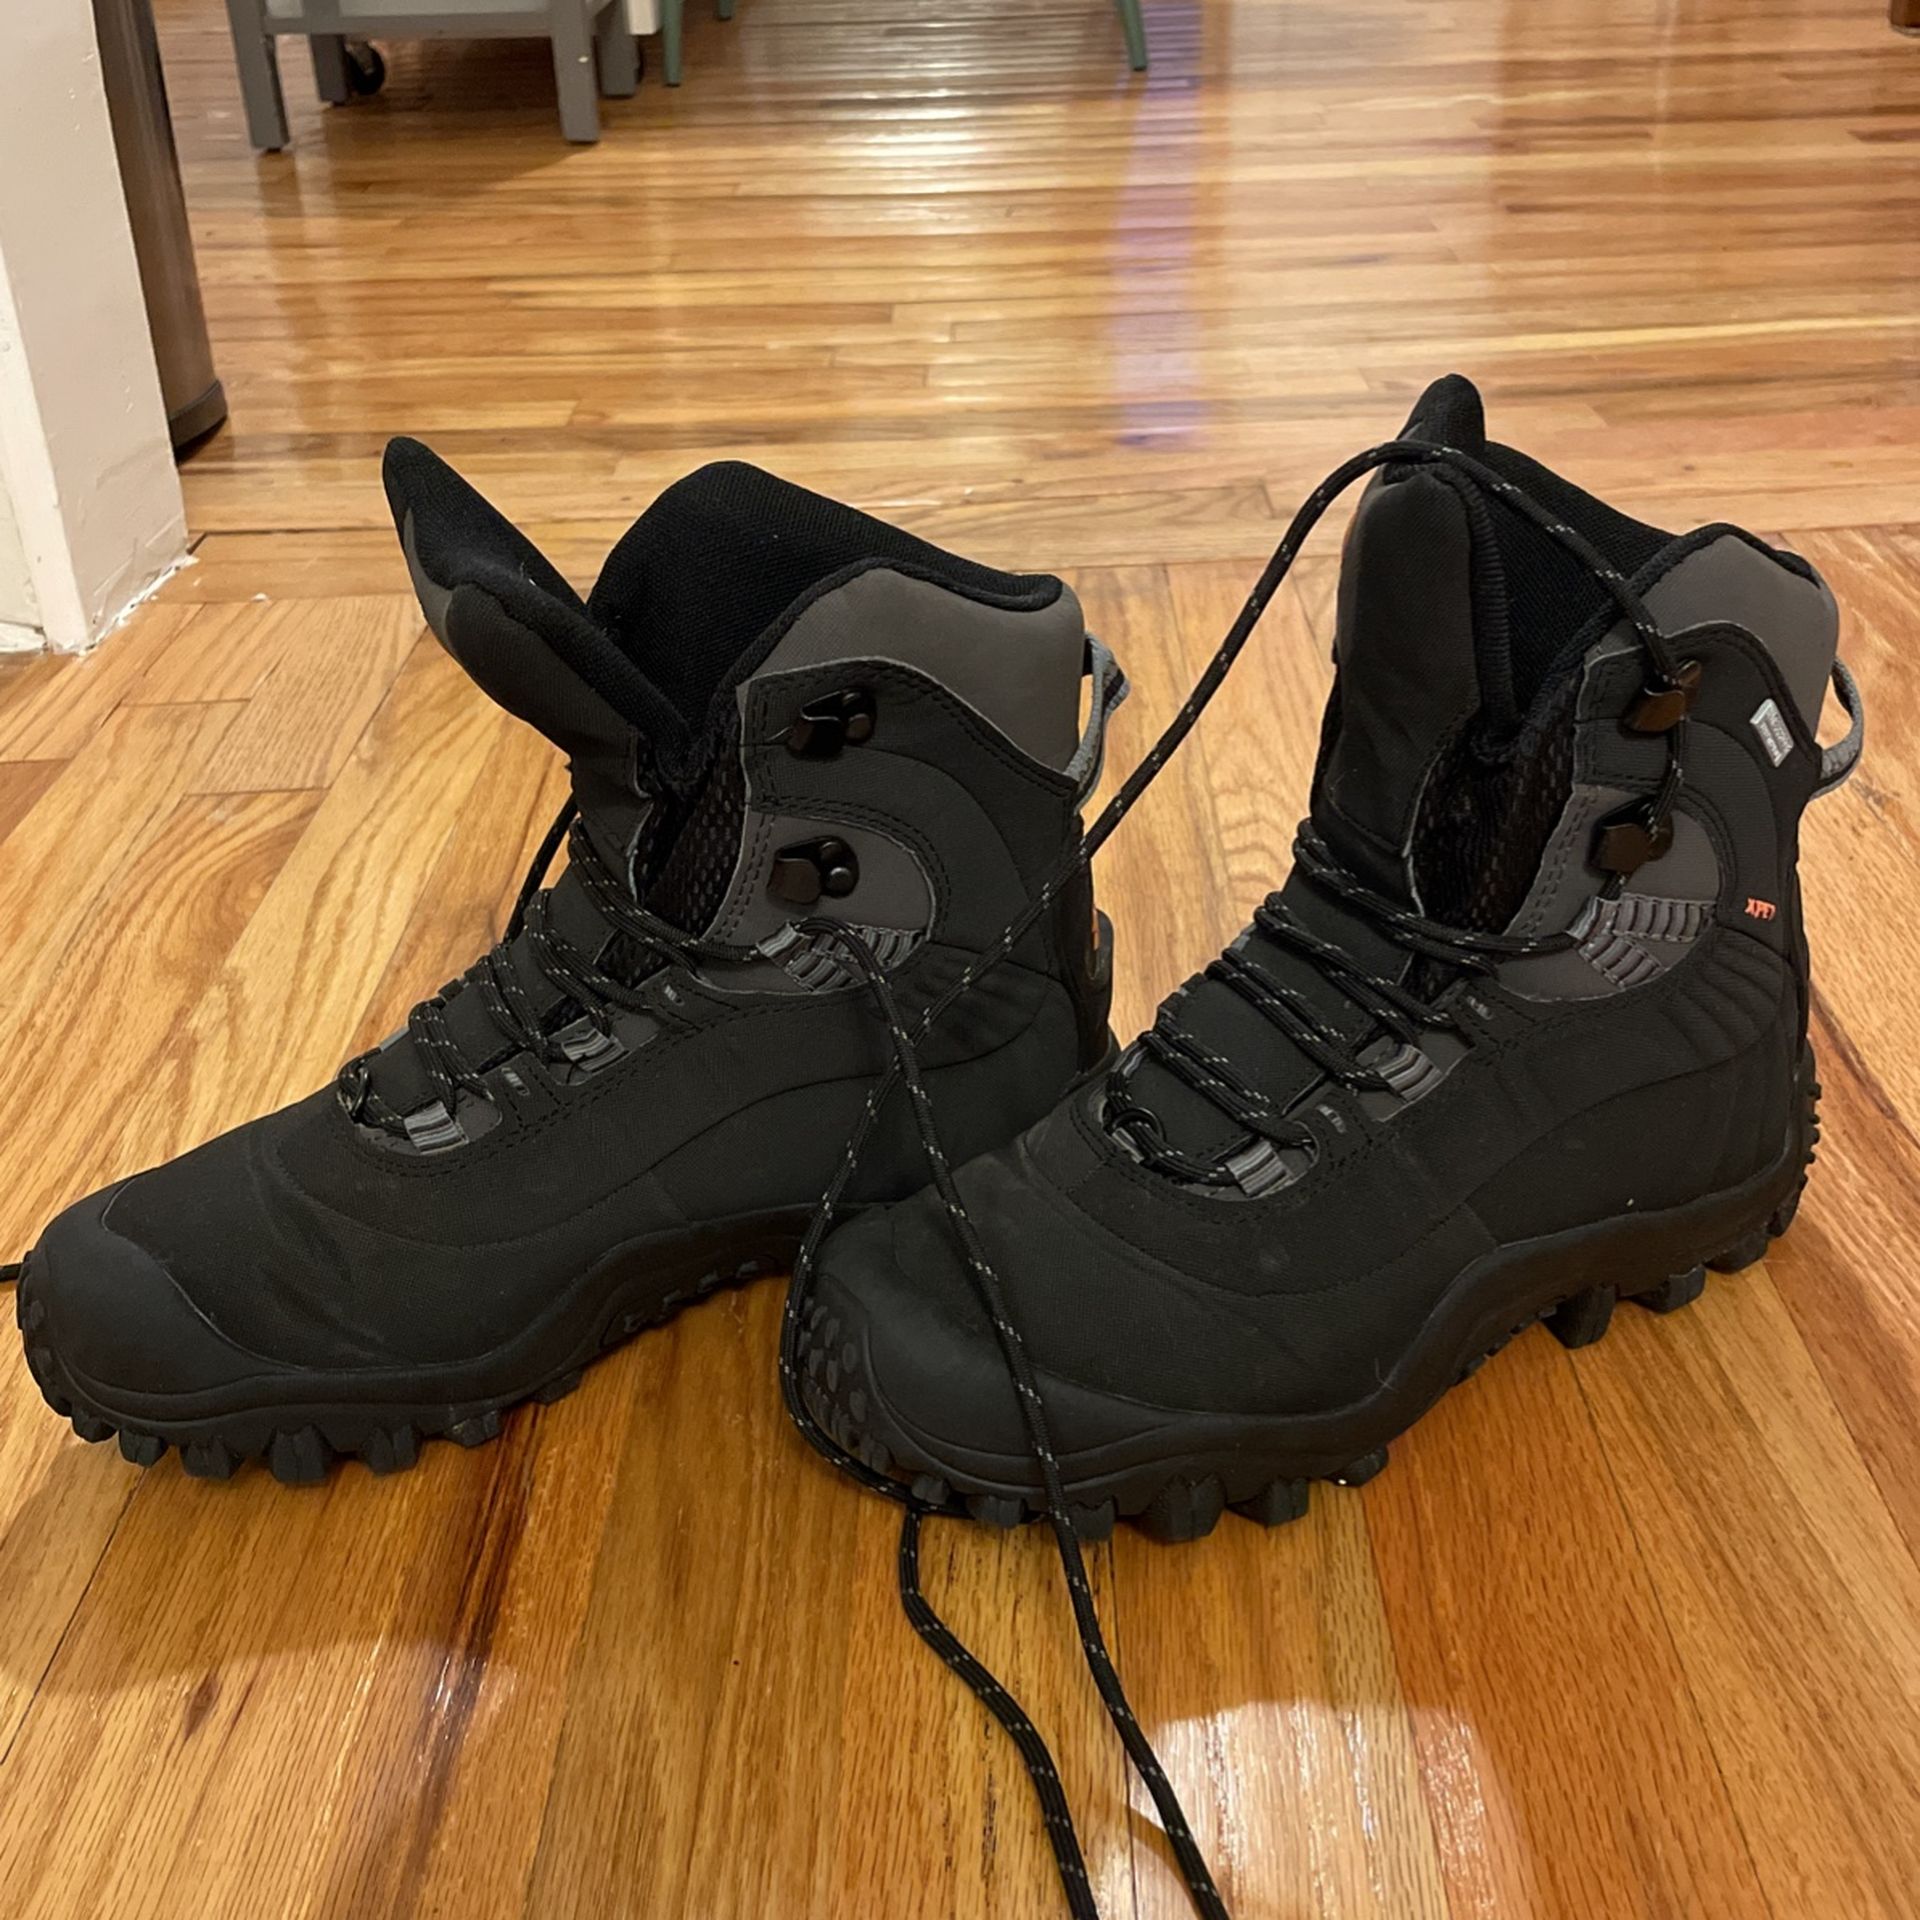 Women’s Hiking Boots Size 9.5